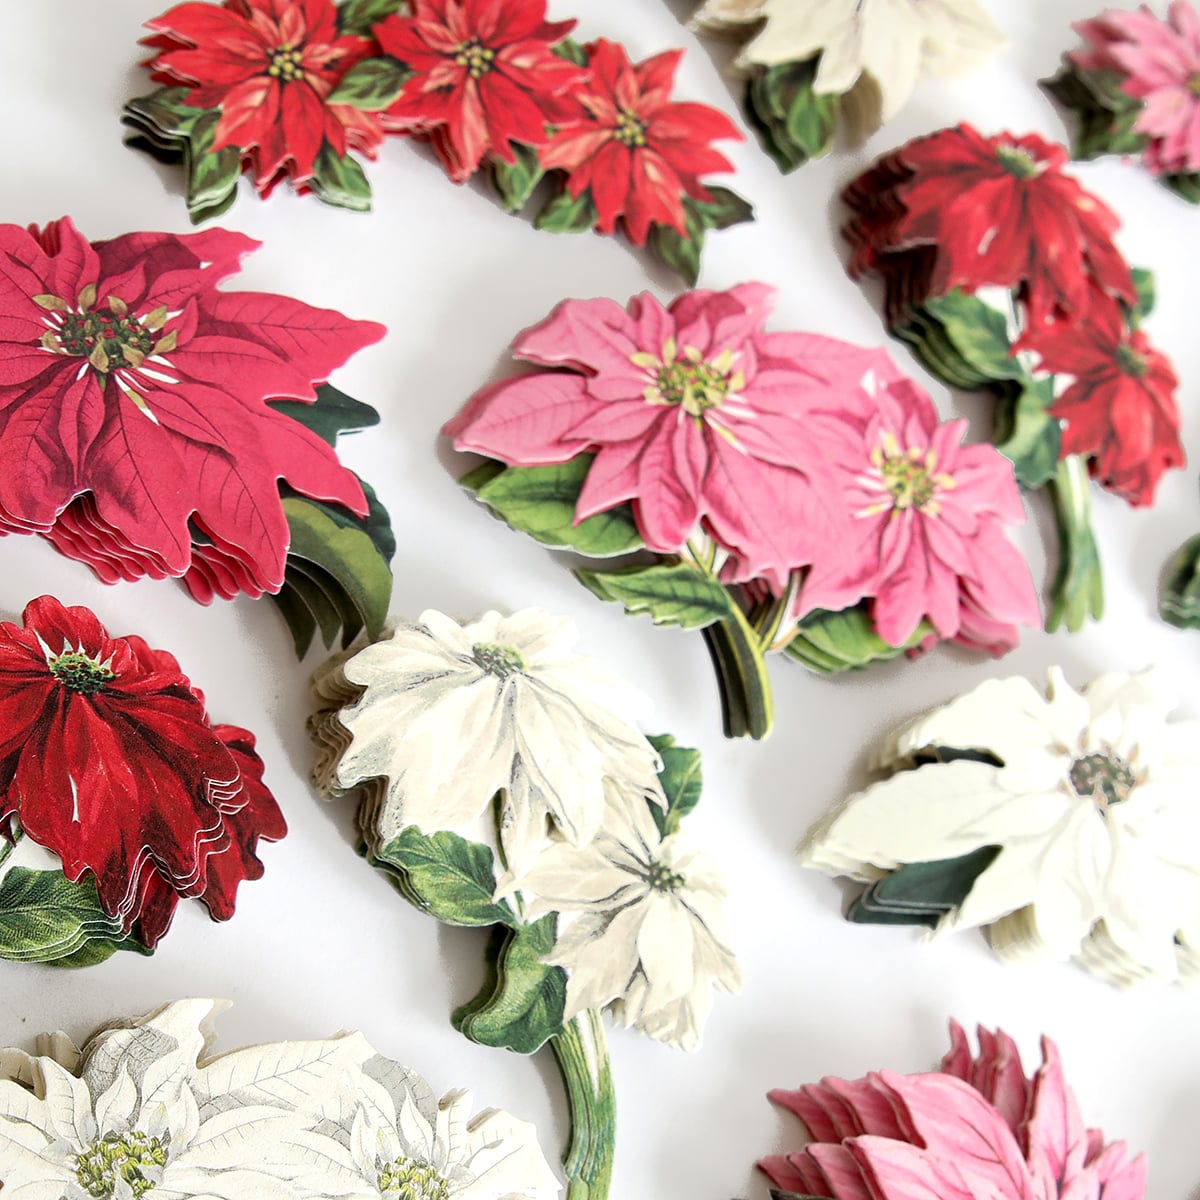 a bunch of poinsettia flowers on a white surface.